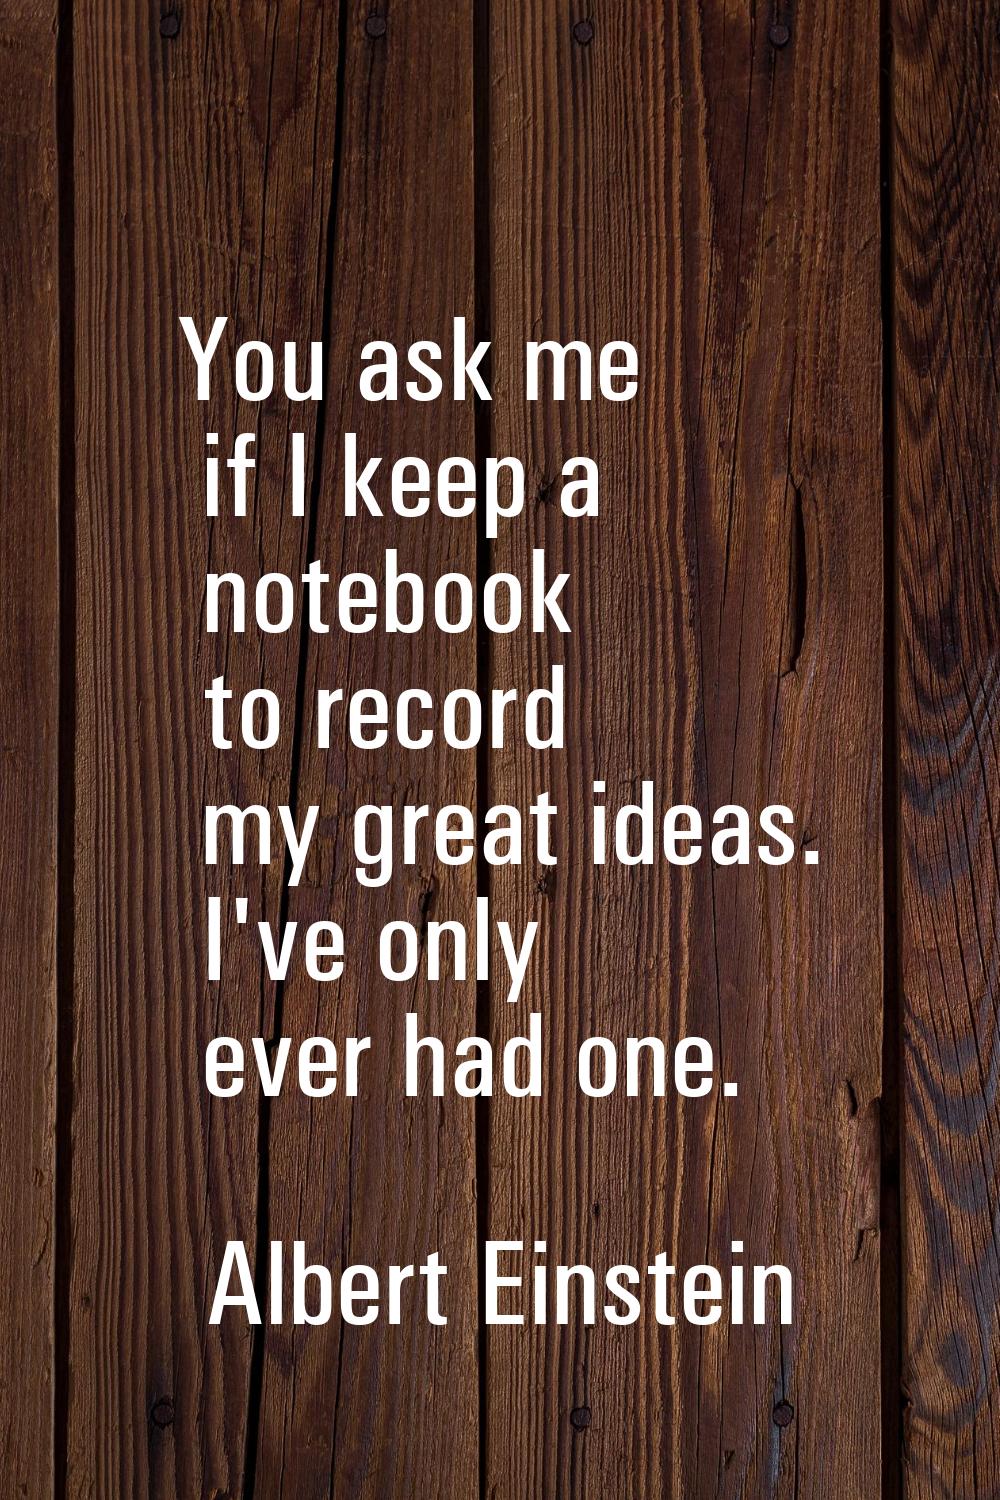 You ask me if I keep a notebook to record my great ideas. I've only ever had one.